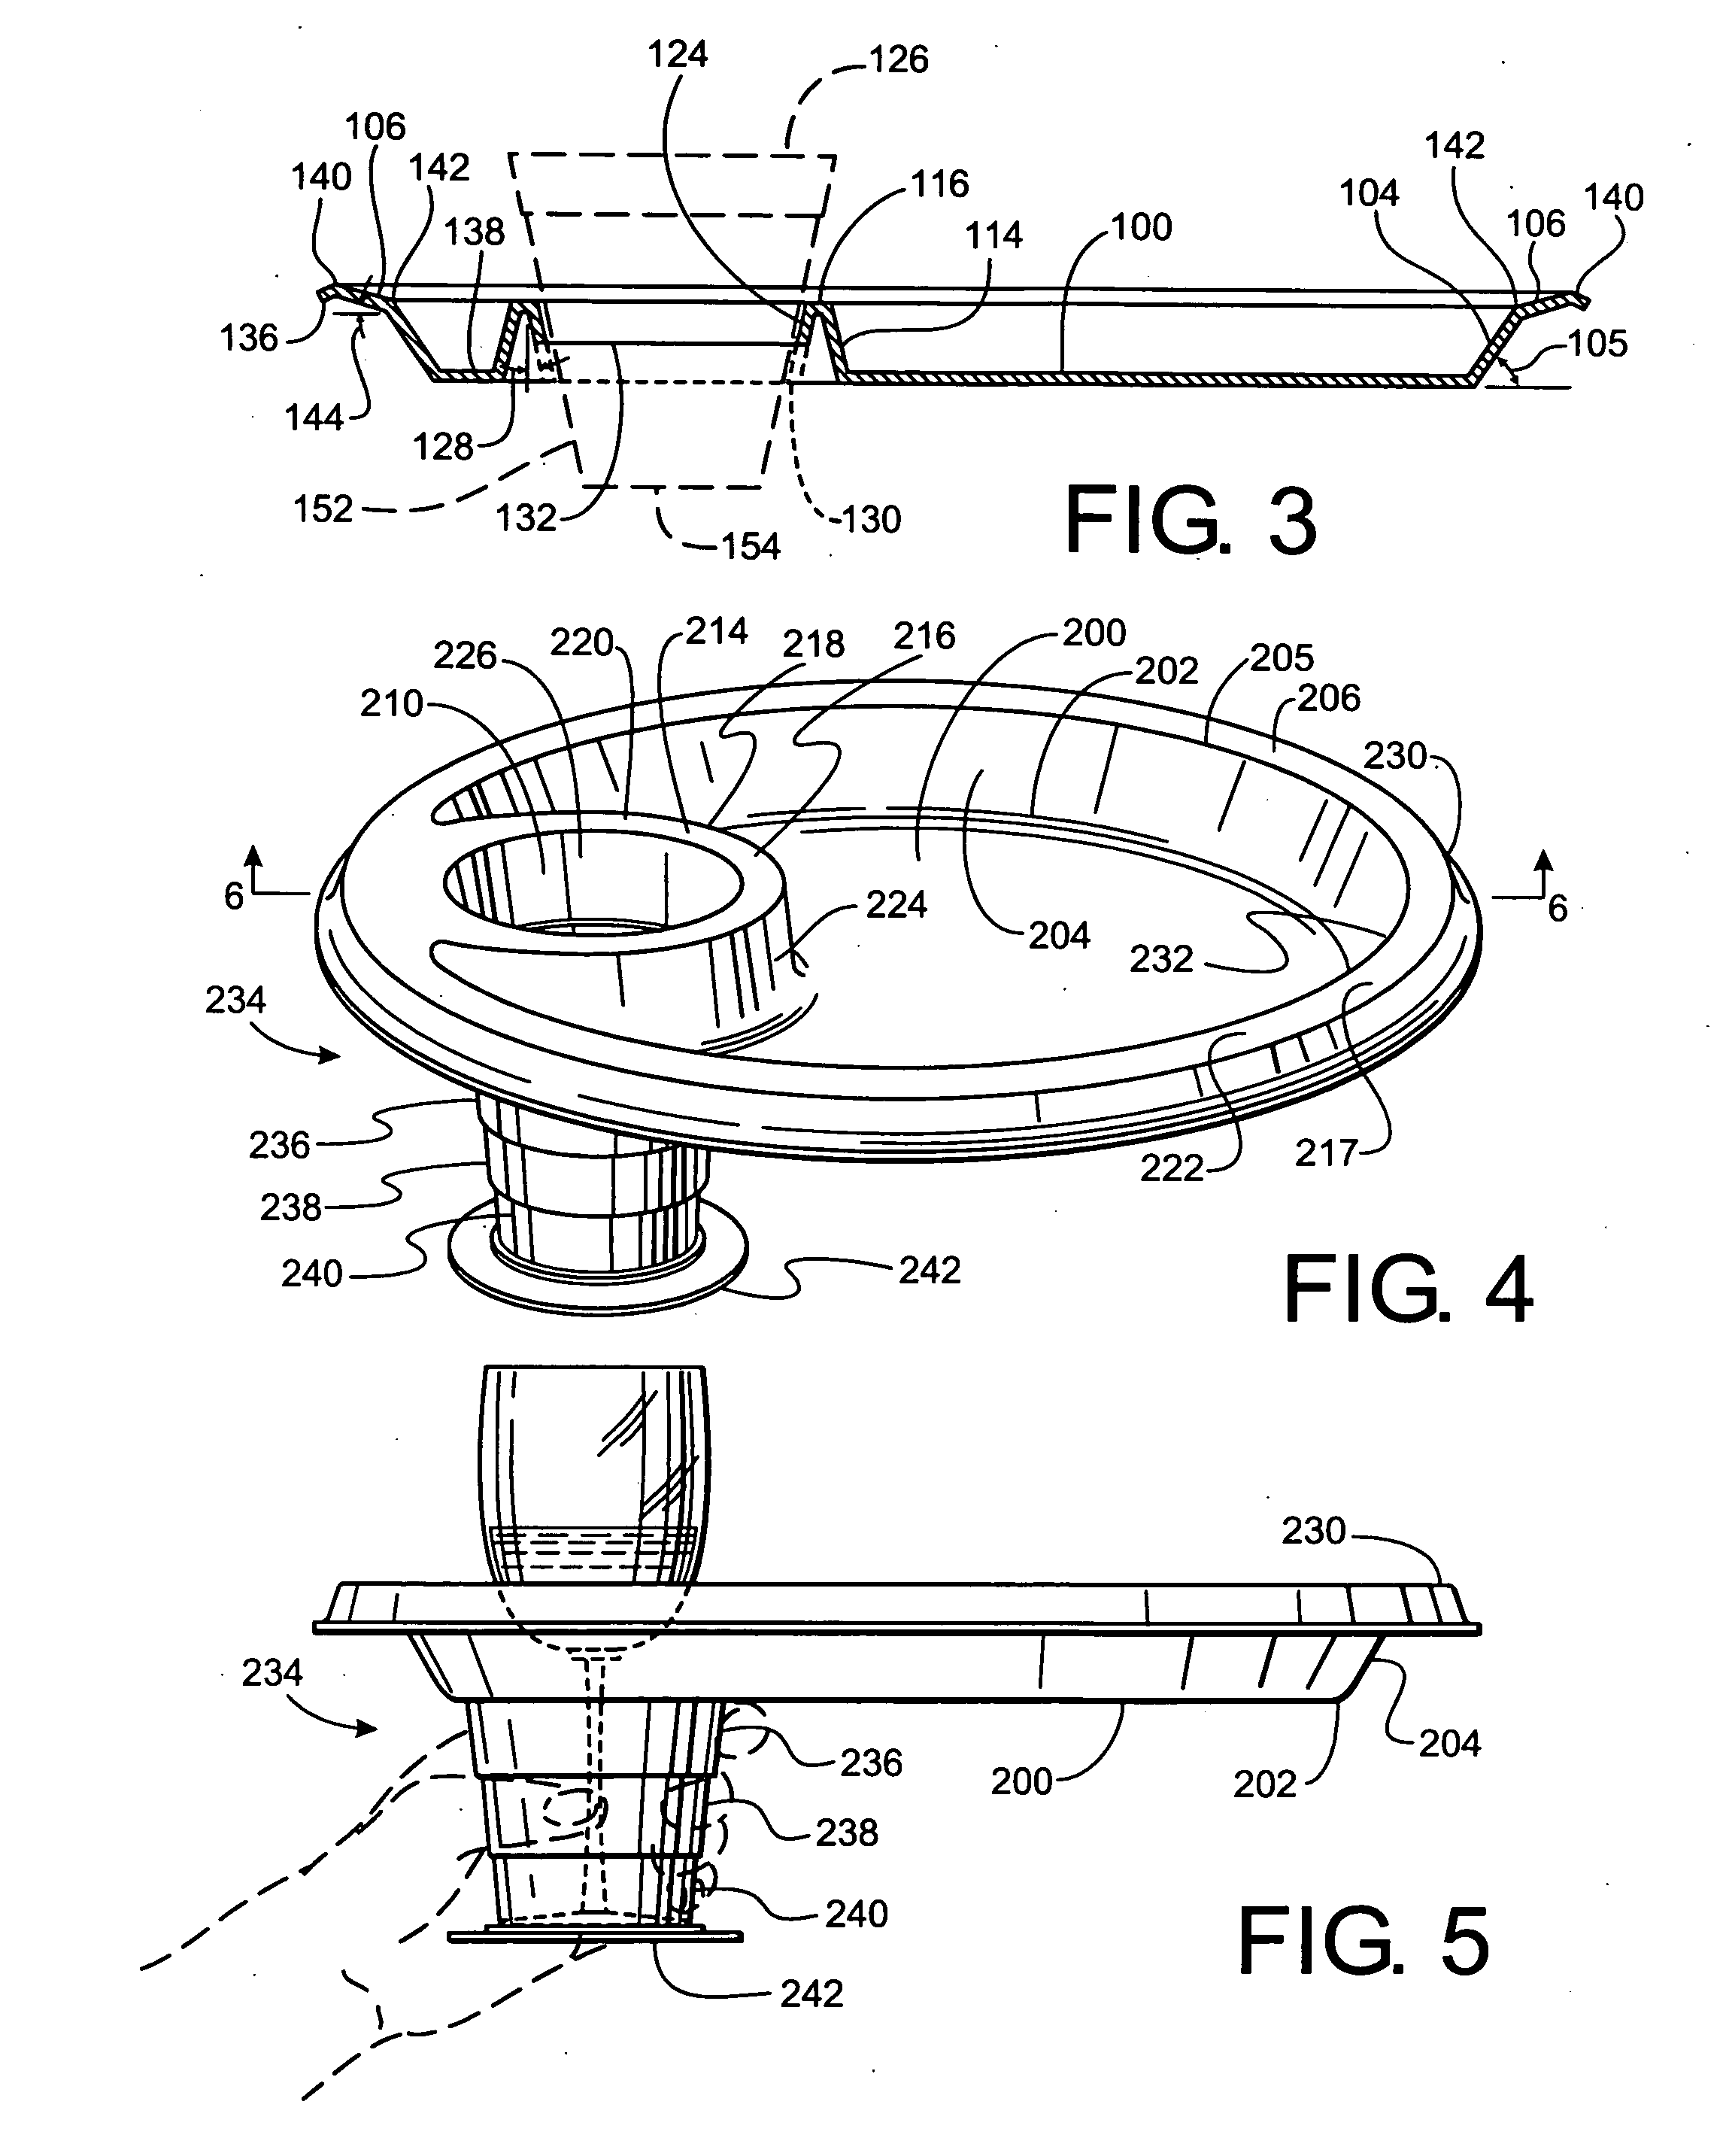 Combined plate and cupholder